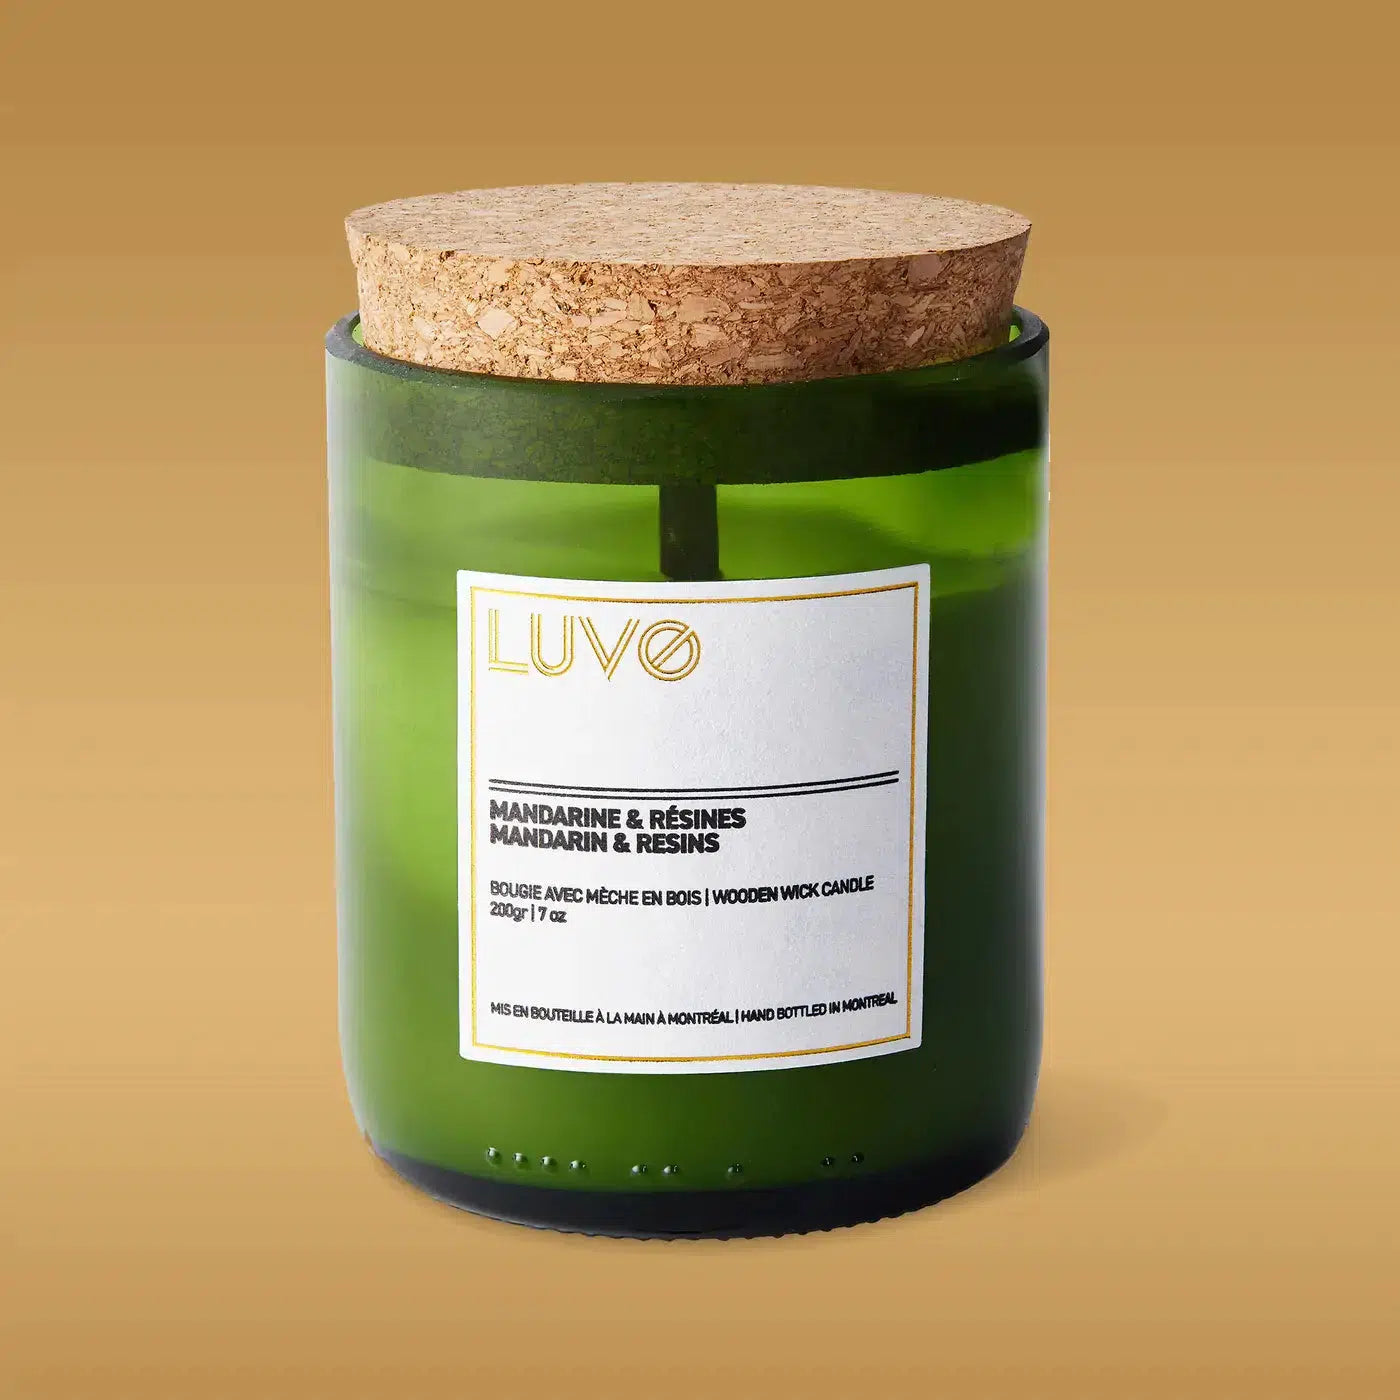 Luvo Wooden Wick & Coconut Wax Candle - Mandarin & Resins Living Luvo Candles Prettycleanshop